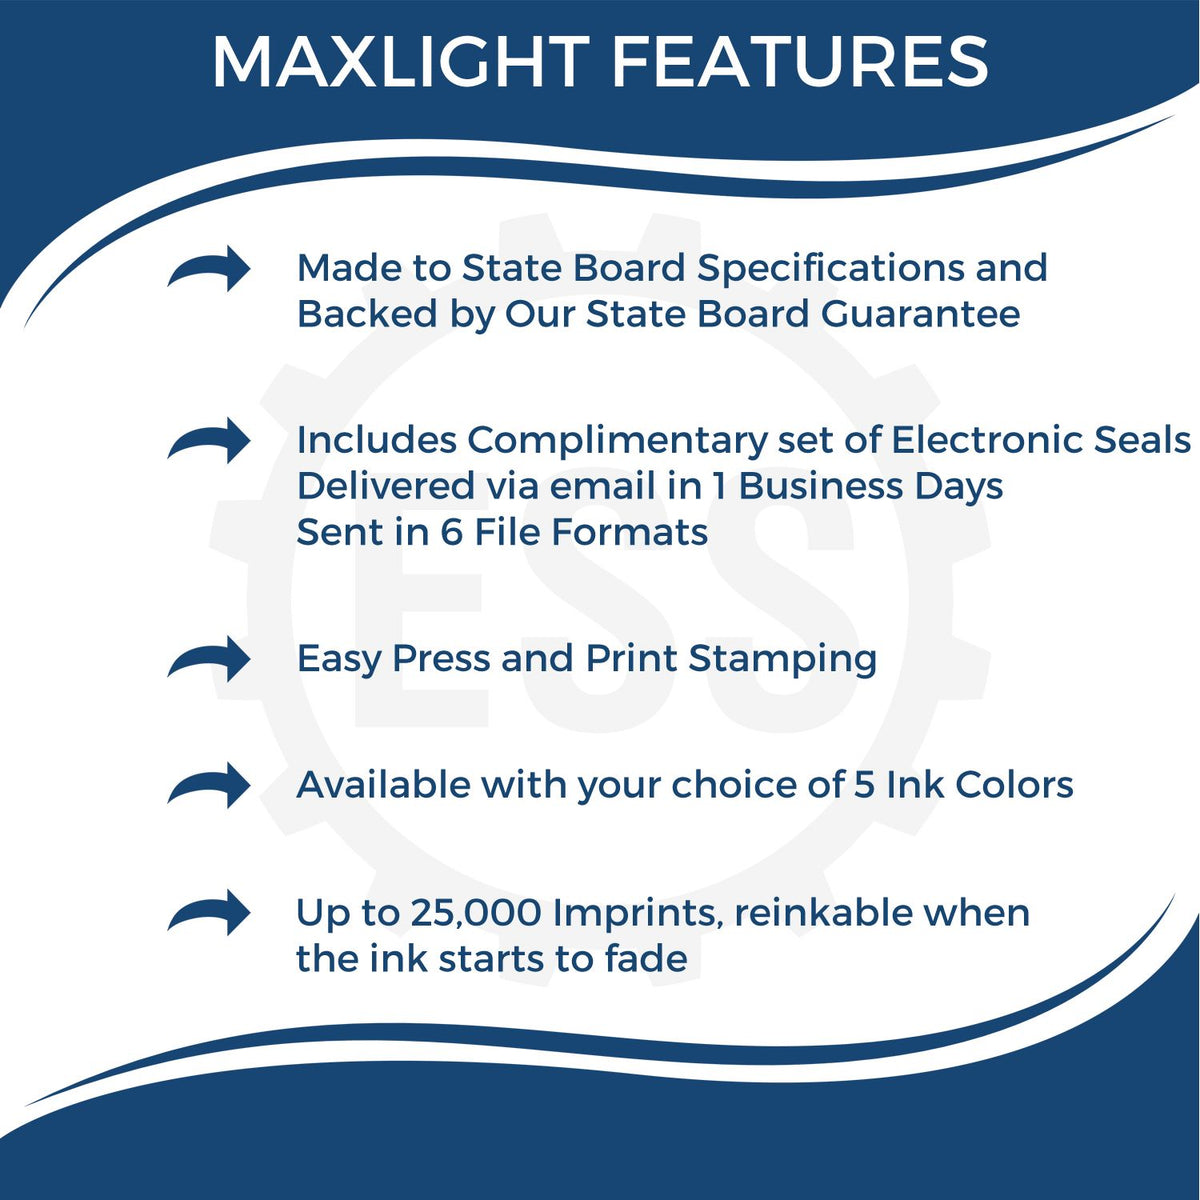 A picture of an infographic highlighting the selling points for the MaxLight Premium Pre-Inked Texas State Seal Notarial Stamp